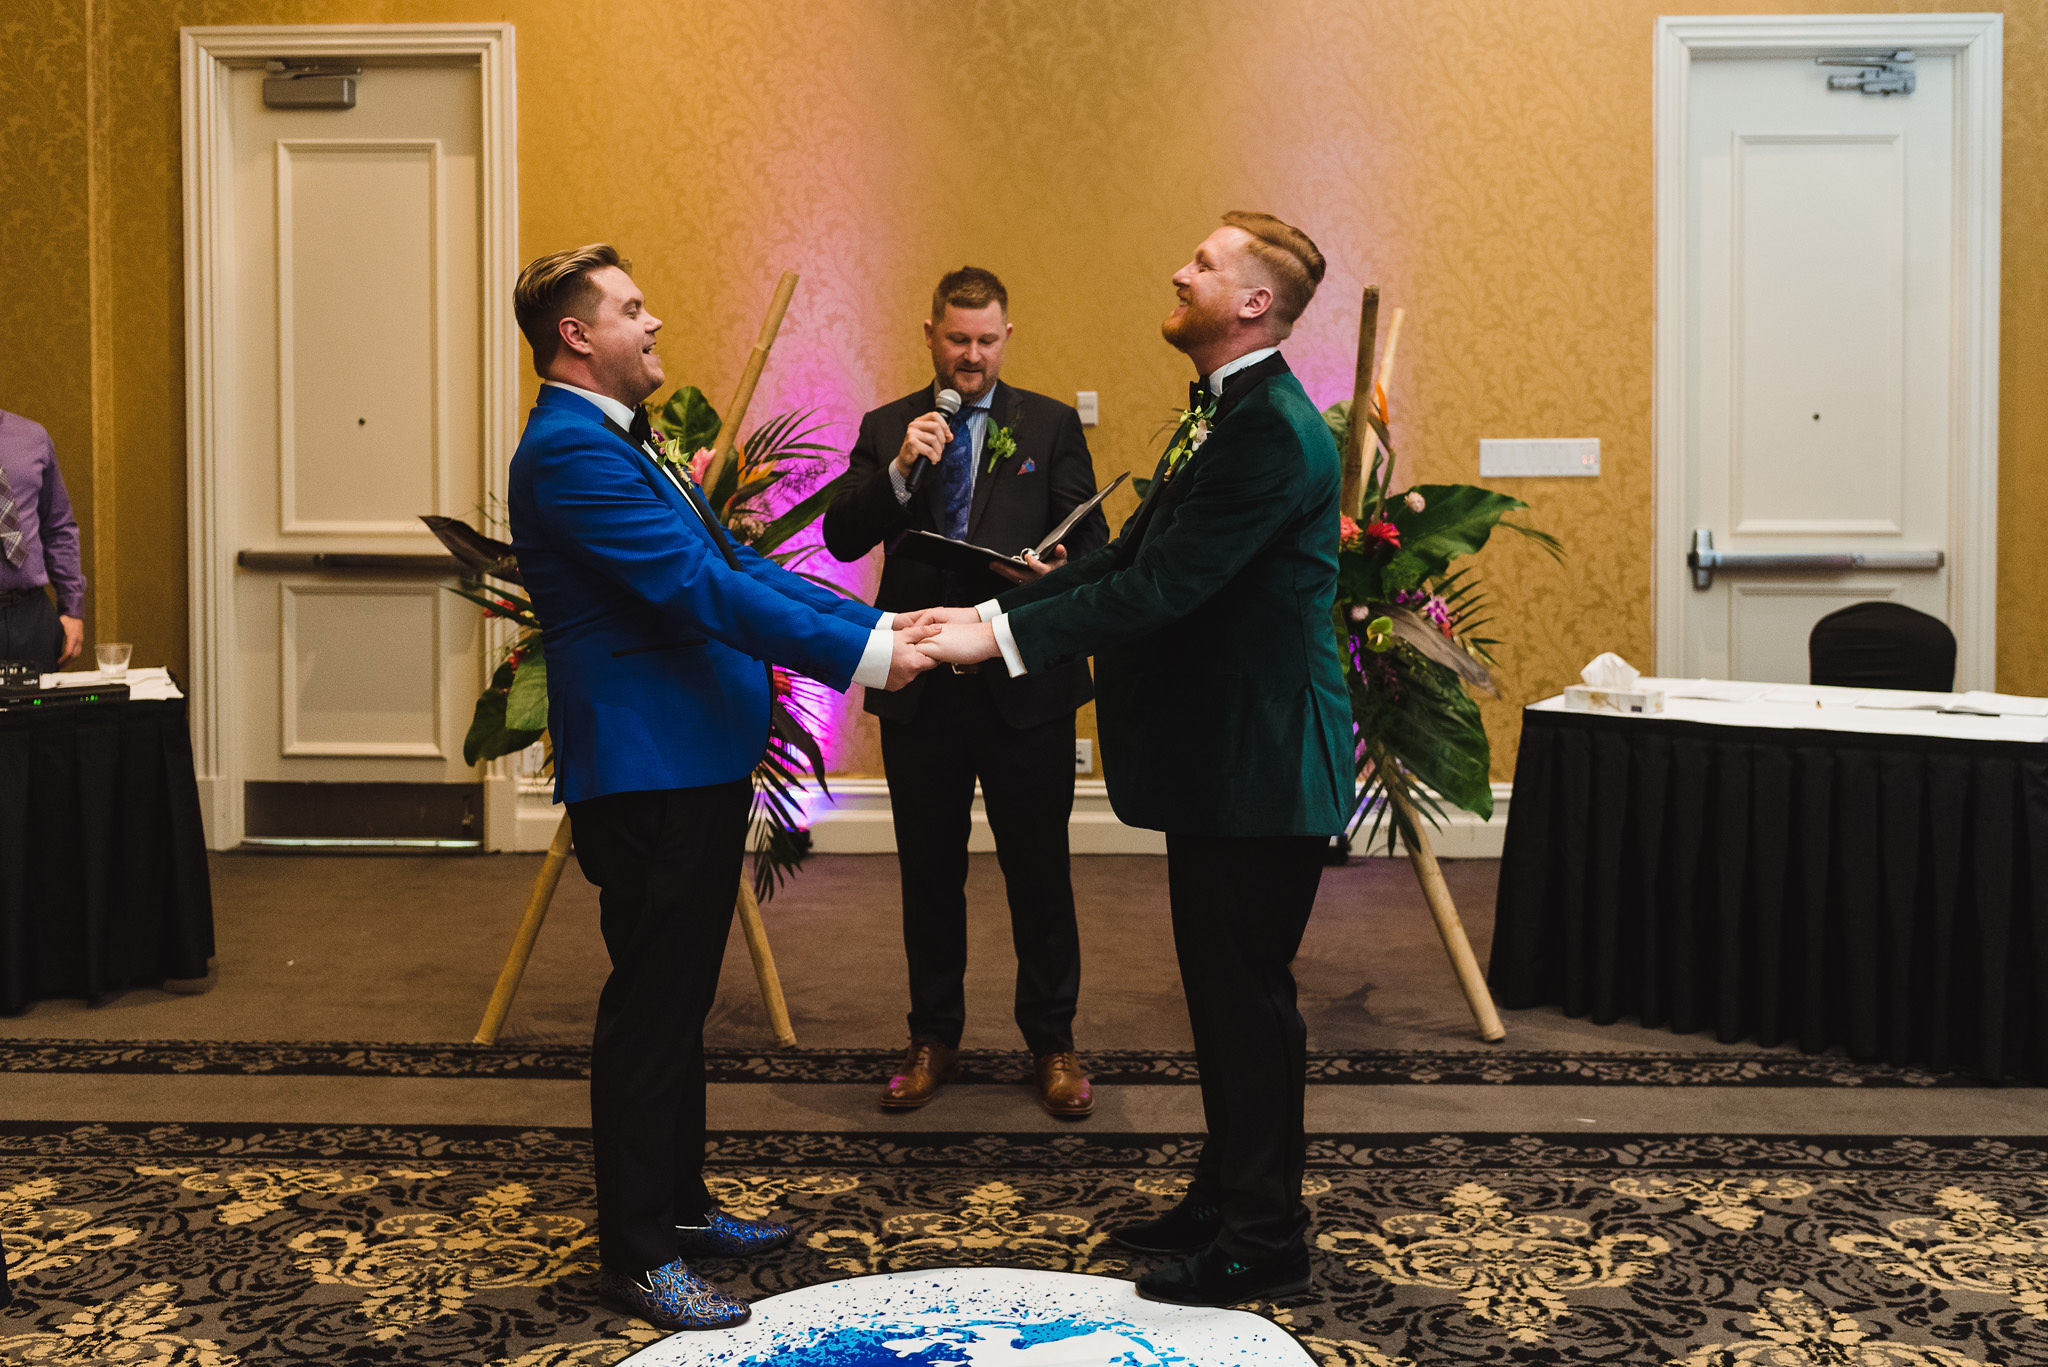 grooms holding hands and laughing during wedding ceremony at the Hilton Fallsview in Niagara Falls